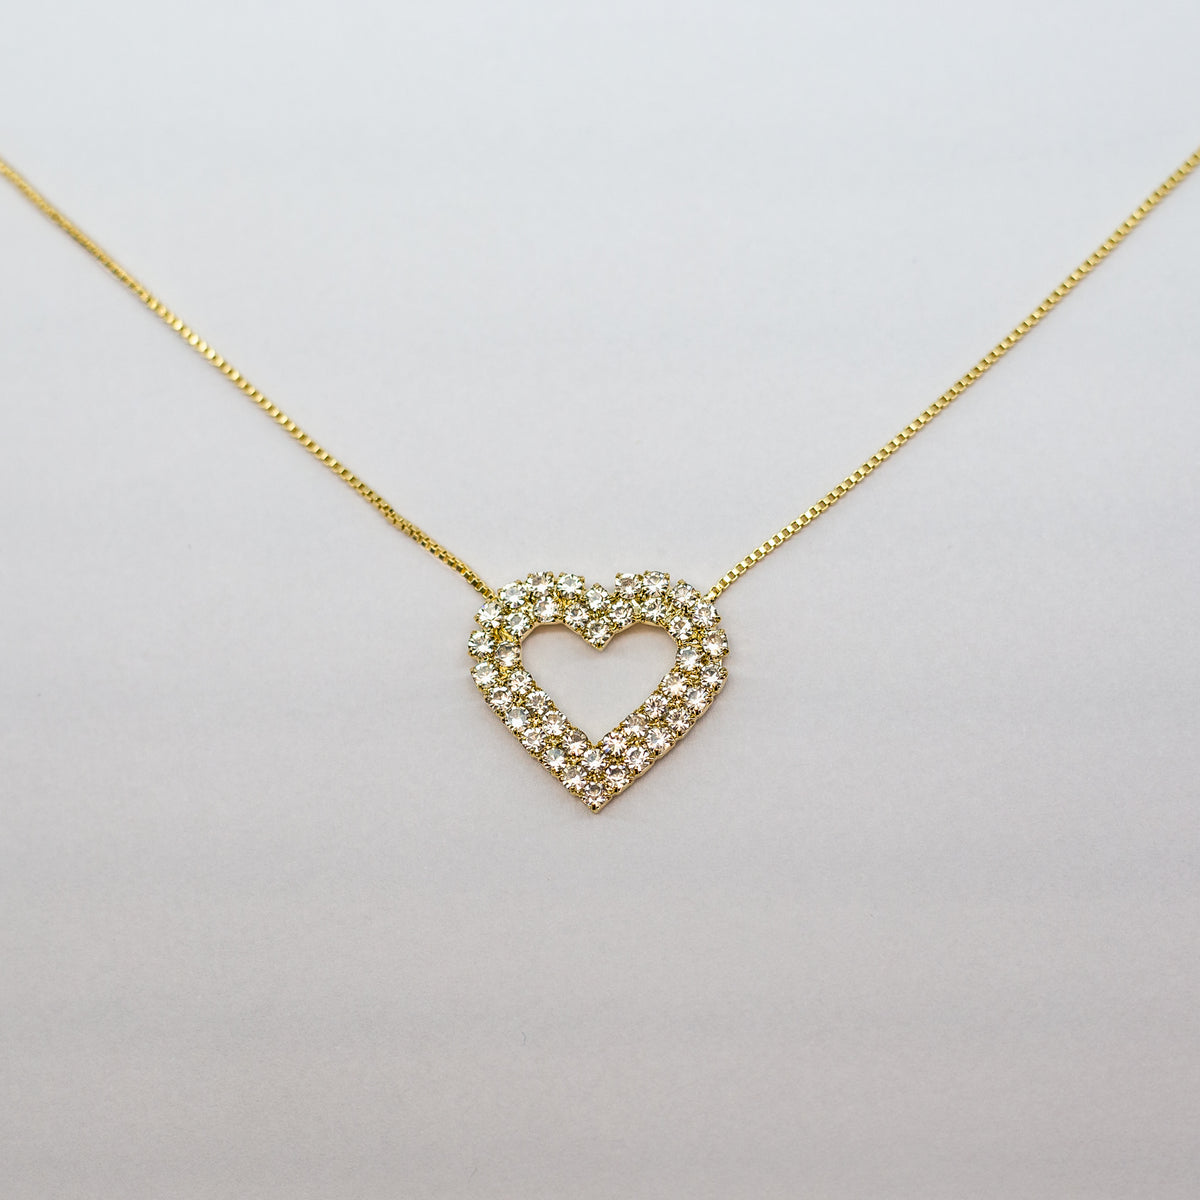 Esspoc Lovely Heart Pendant Necklace Charms Gold Color Crystal